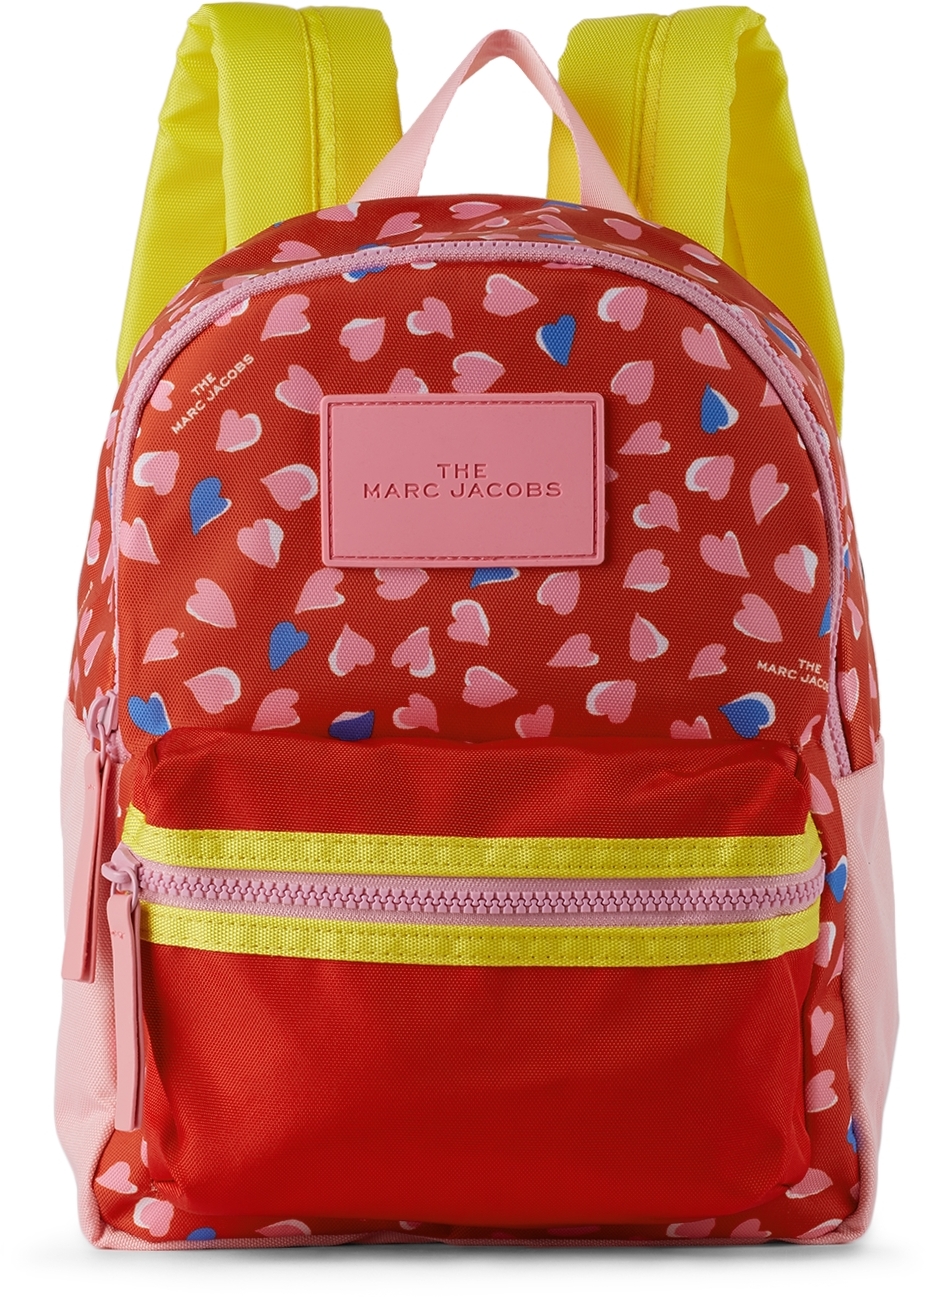 SSENSE Accessories Bags Rucksacks Kids Red & Pink Hearts All Over Backpack 